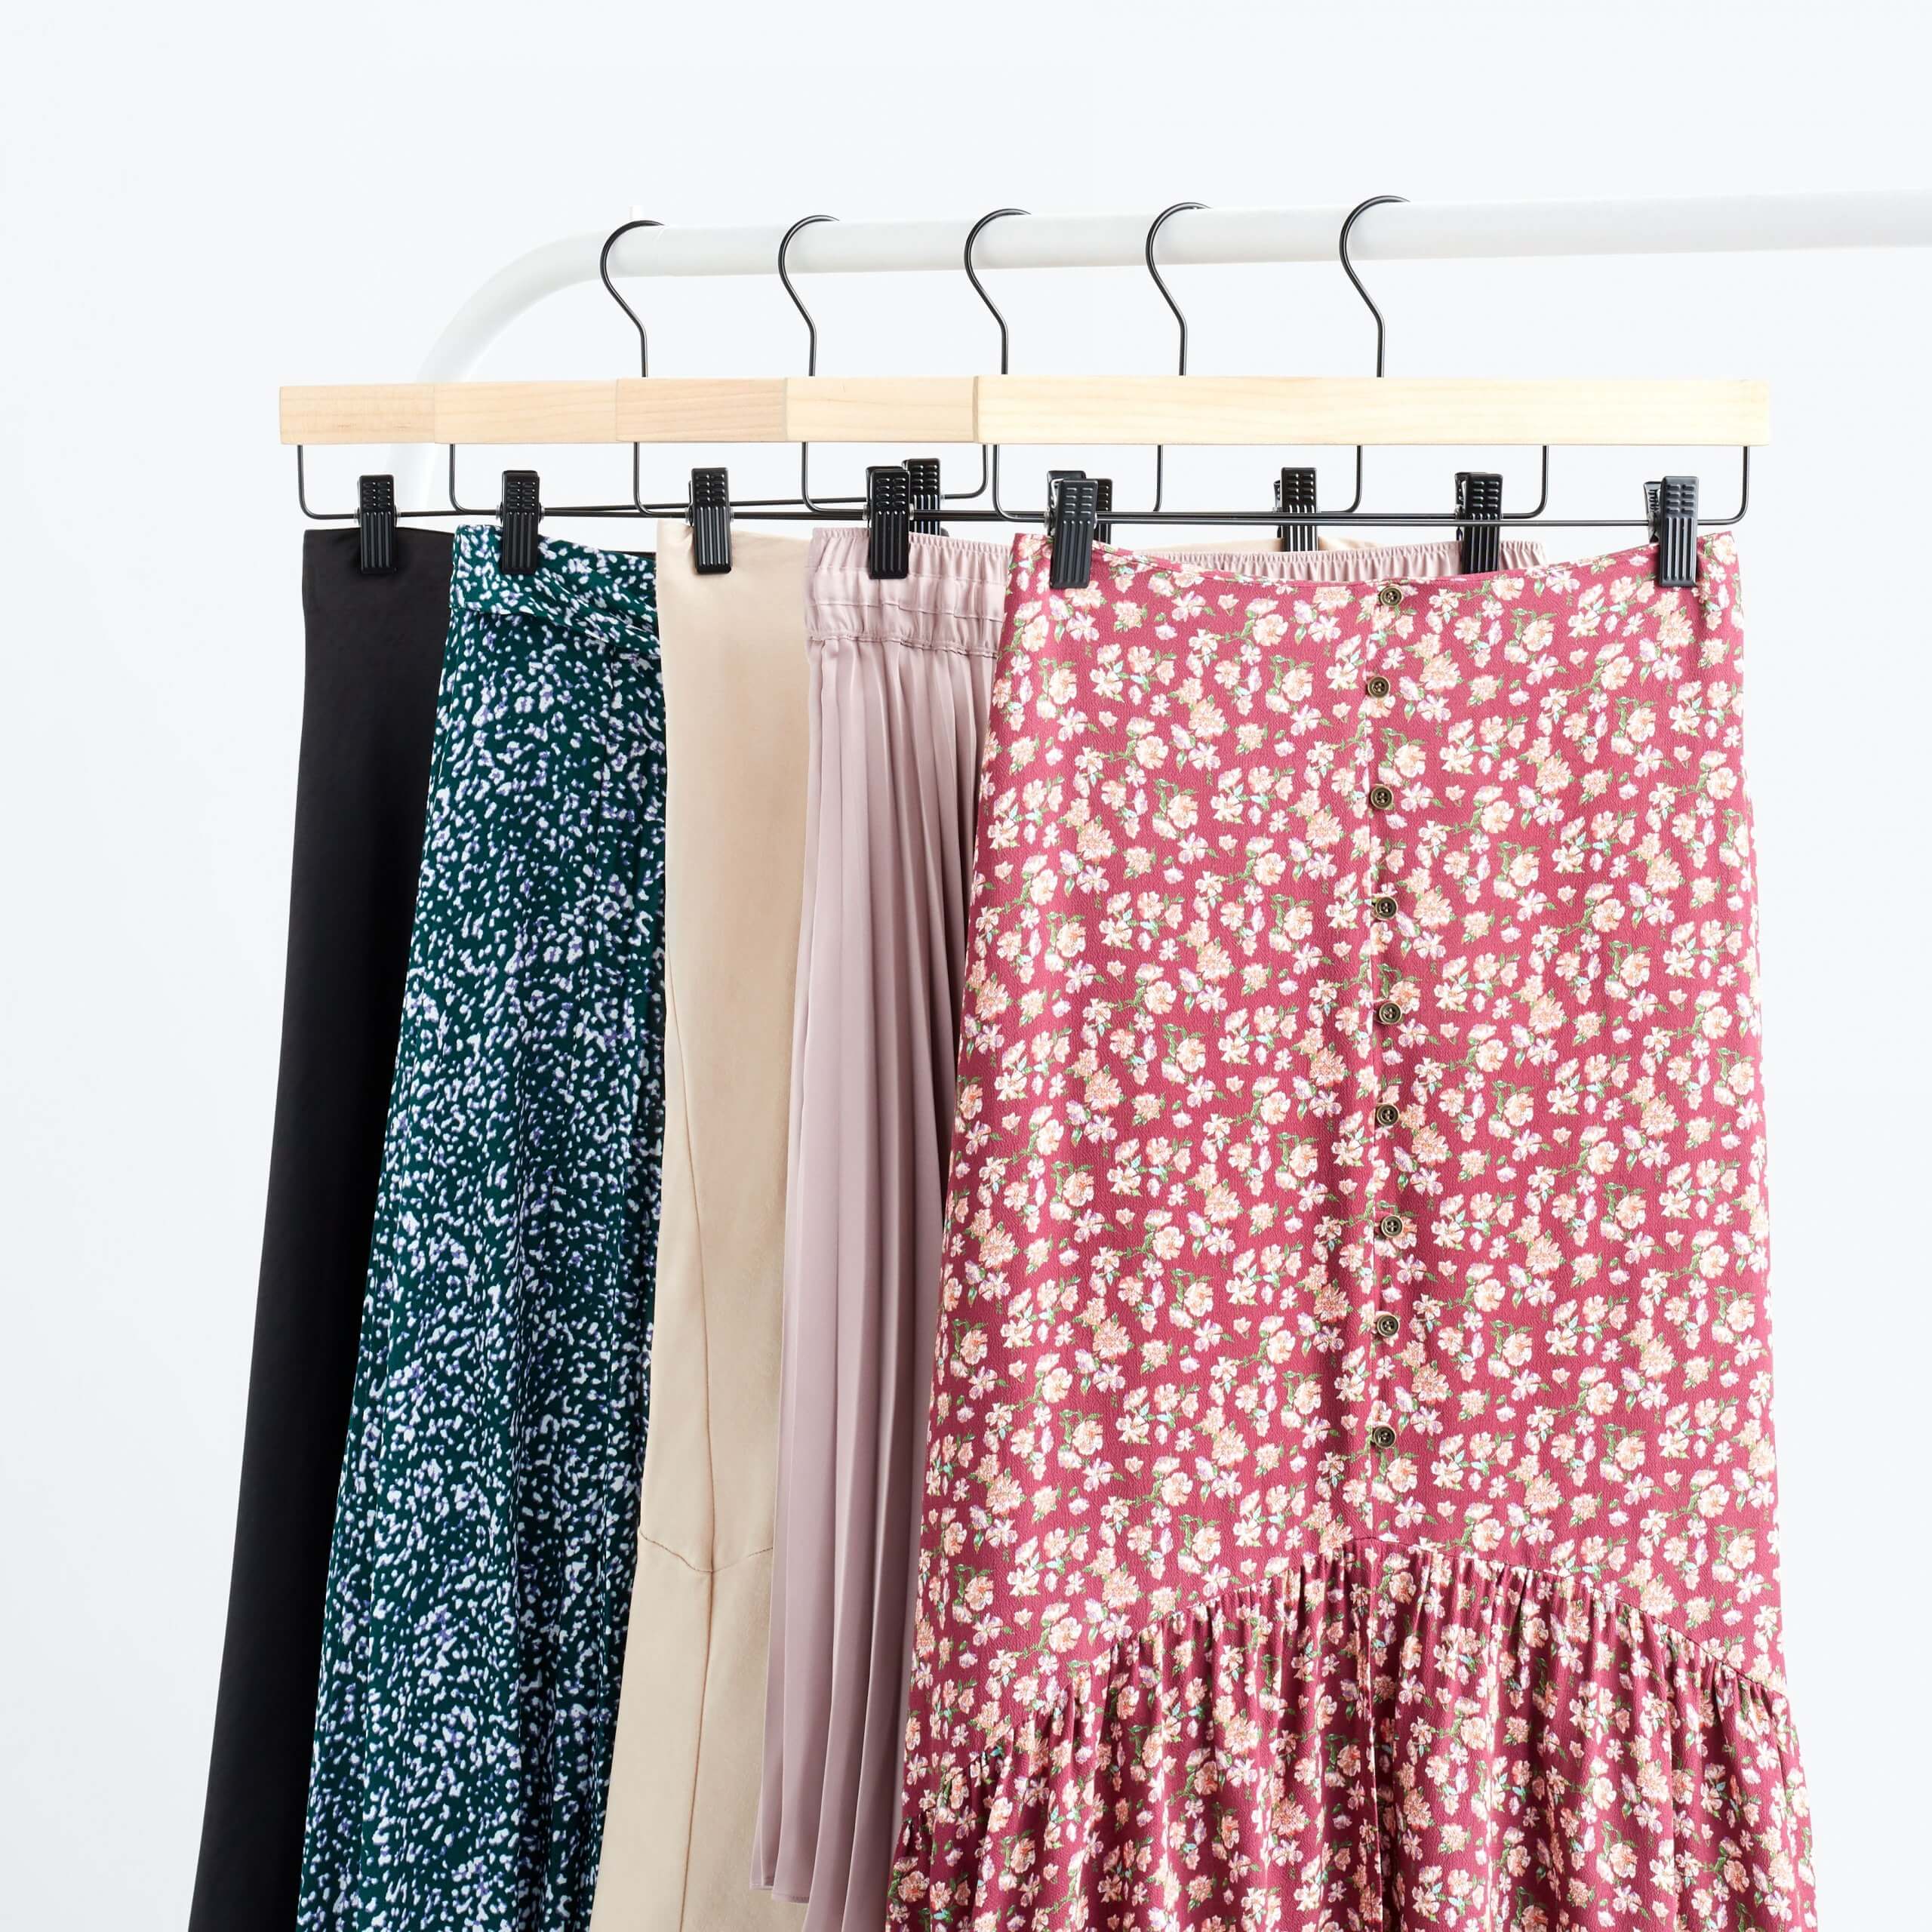 Stitch Fix Women’s rack image of skirts in red floral, blush pink, beige, teal floral and black on wooden hangers. 